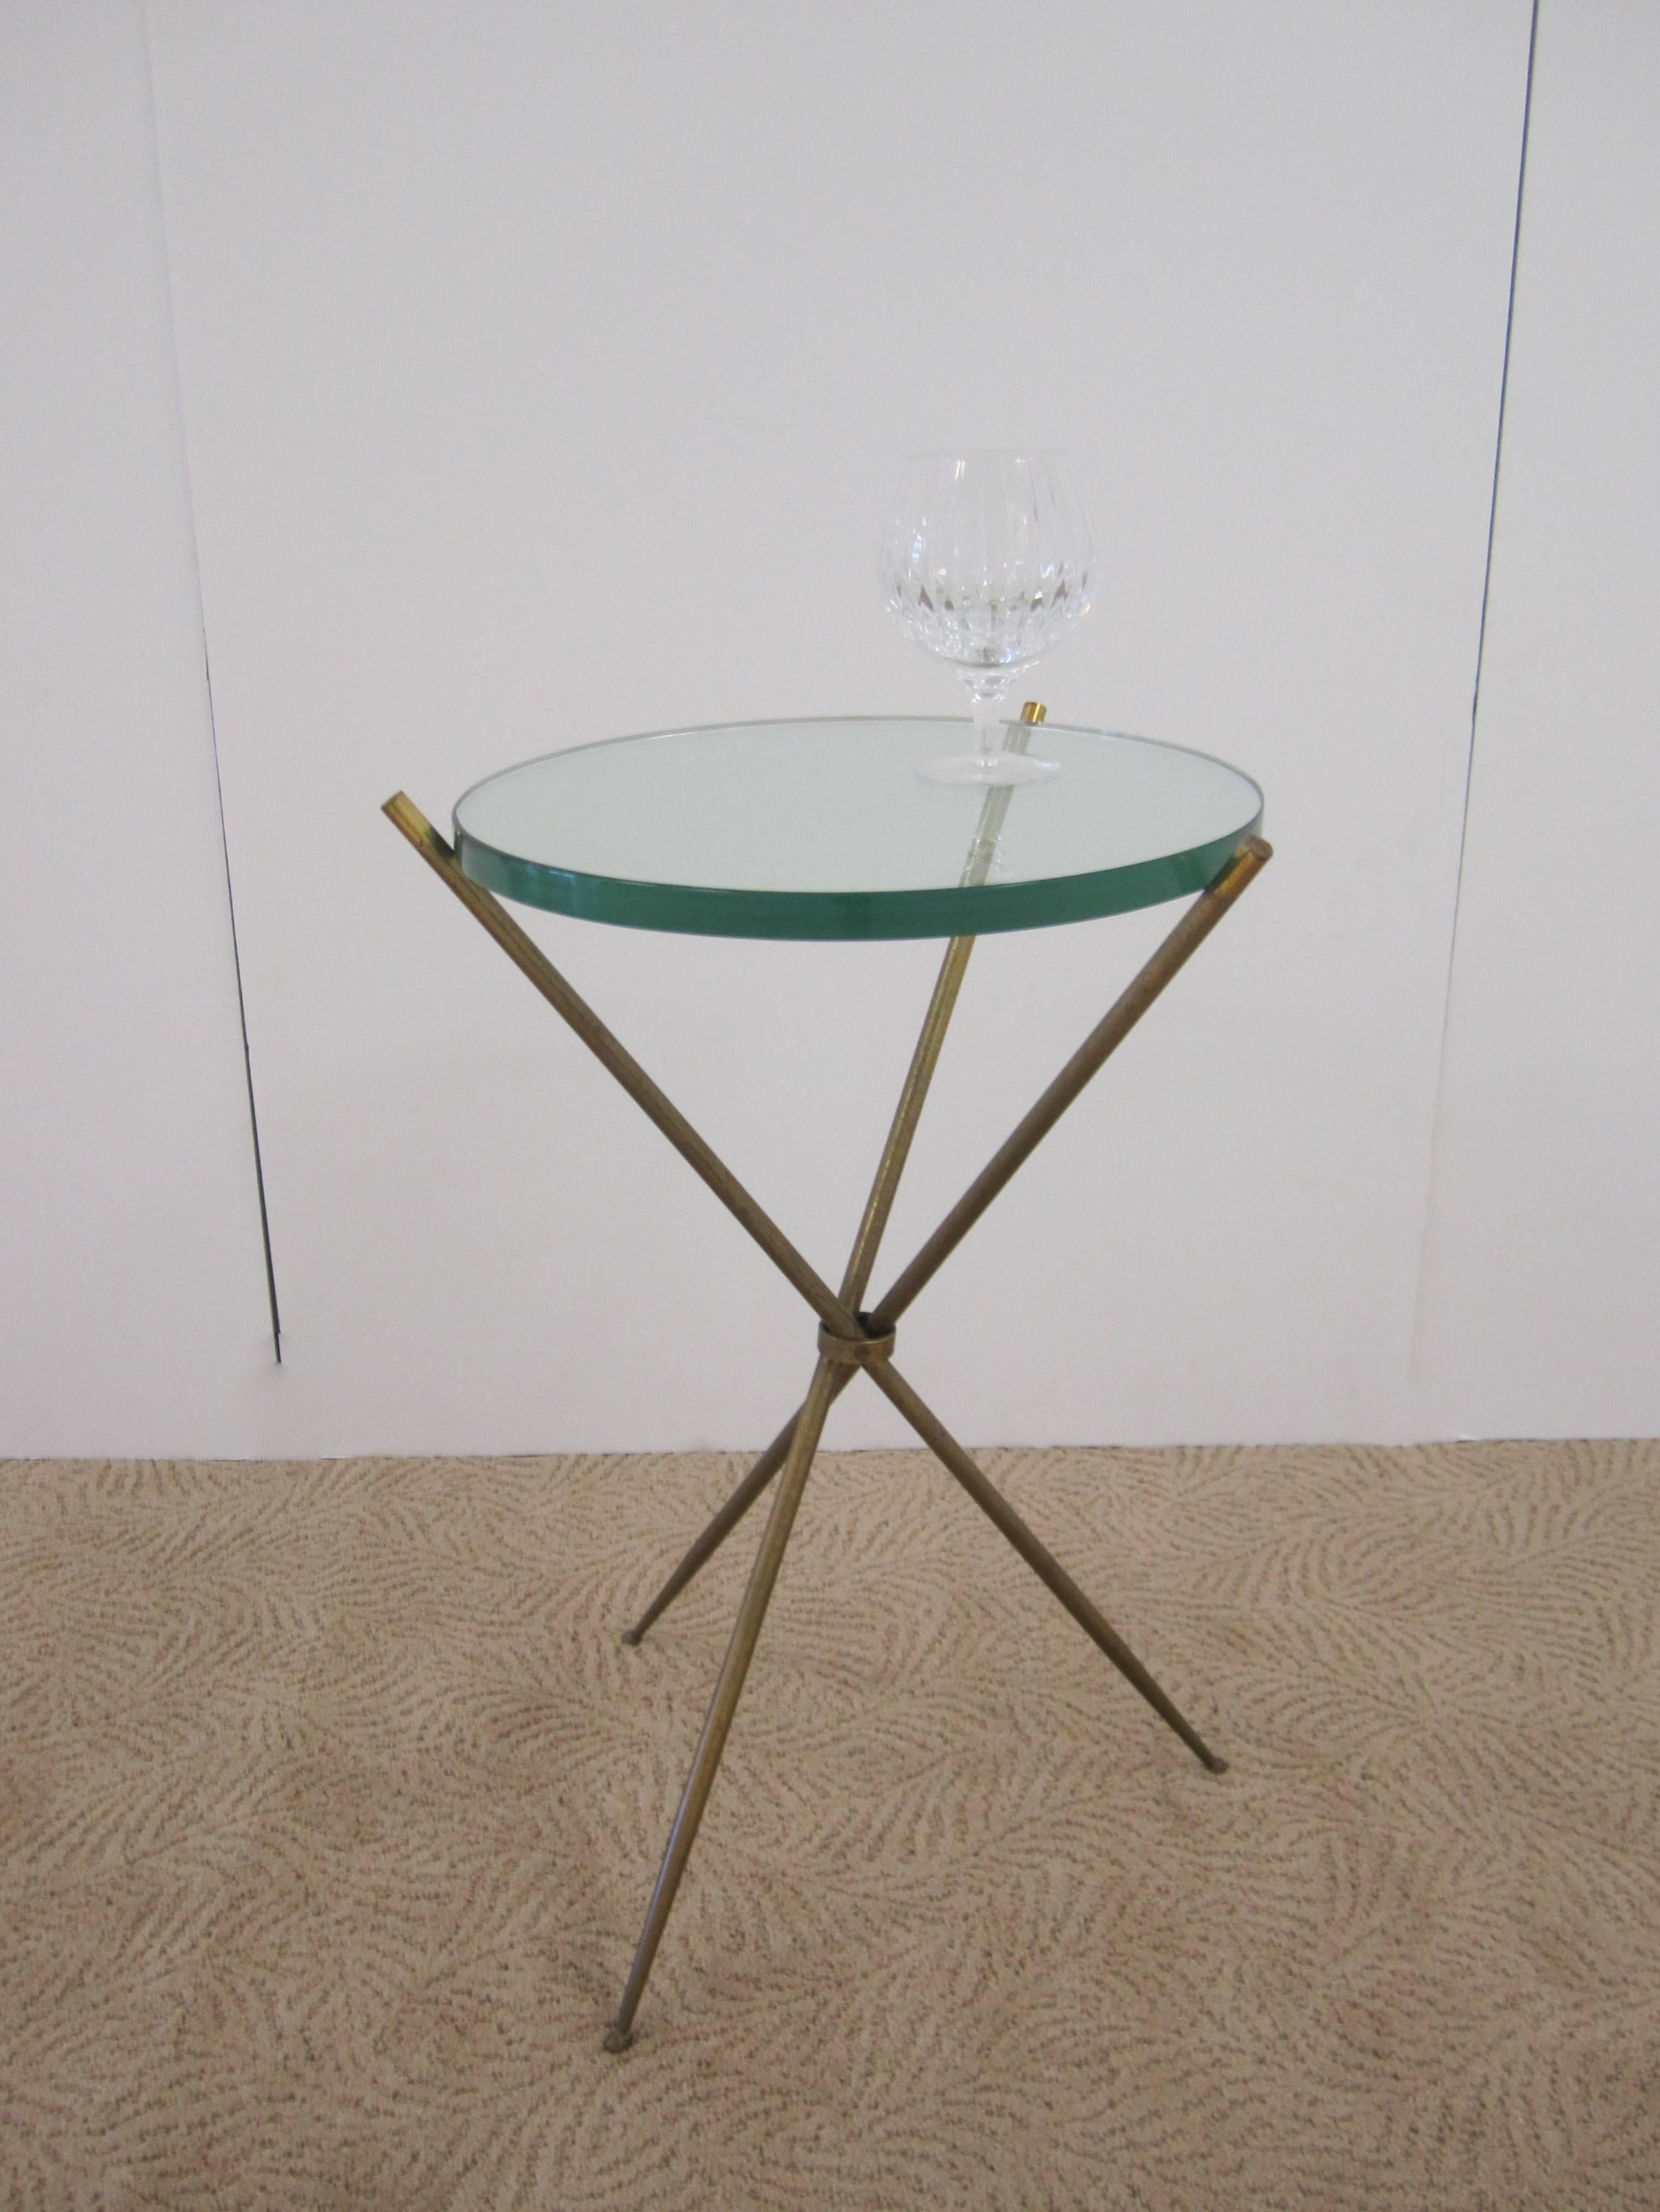 Tempered Vintage Modern Italian Brass and Glass Tripod Side Table after Gio Ponti, Italy